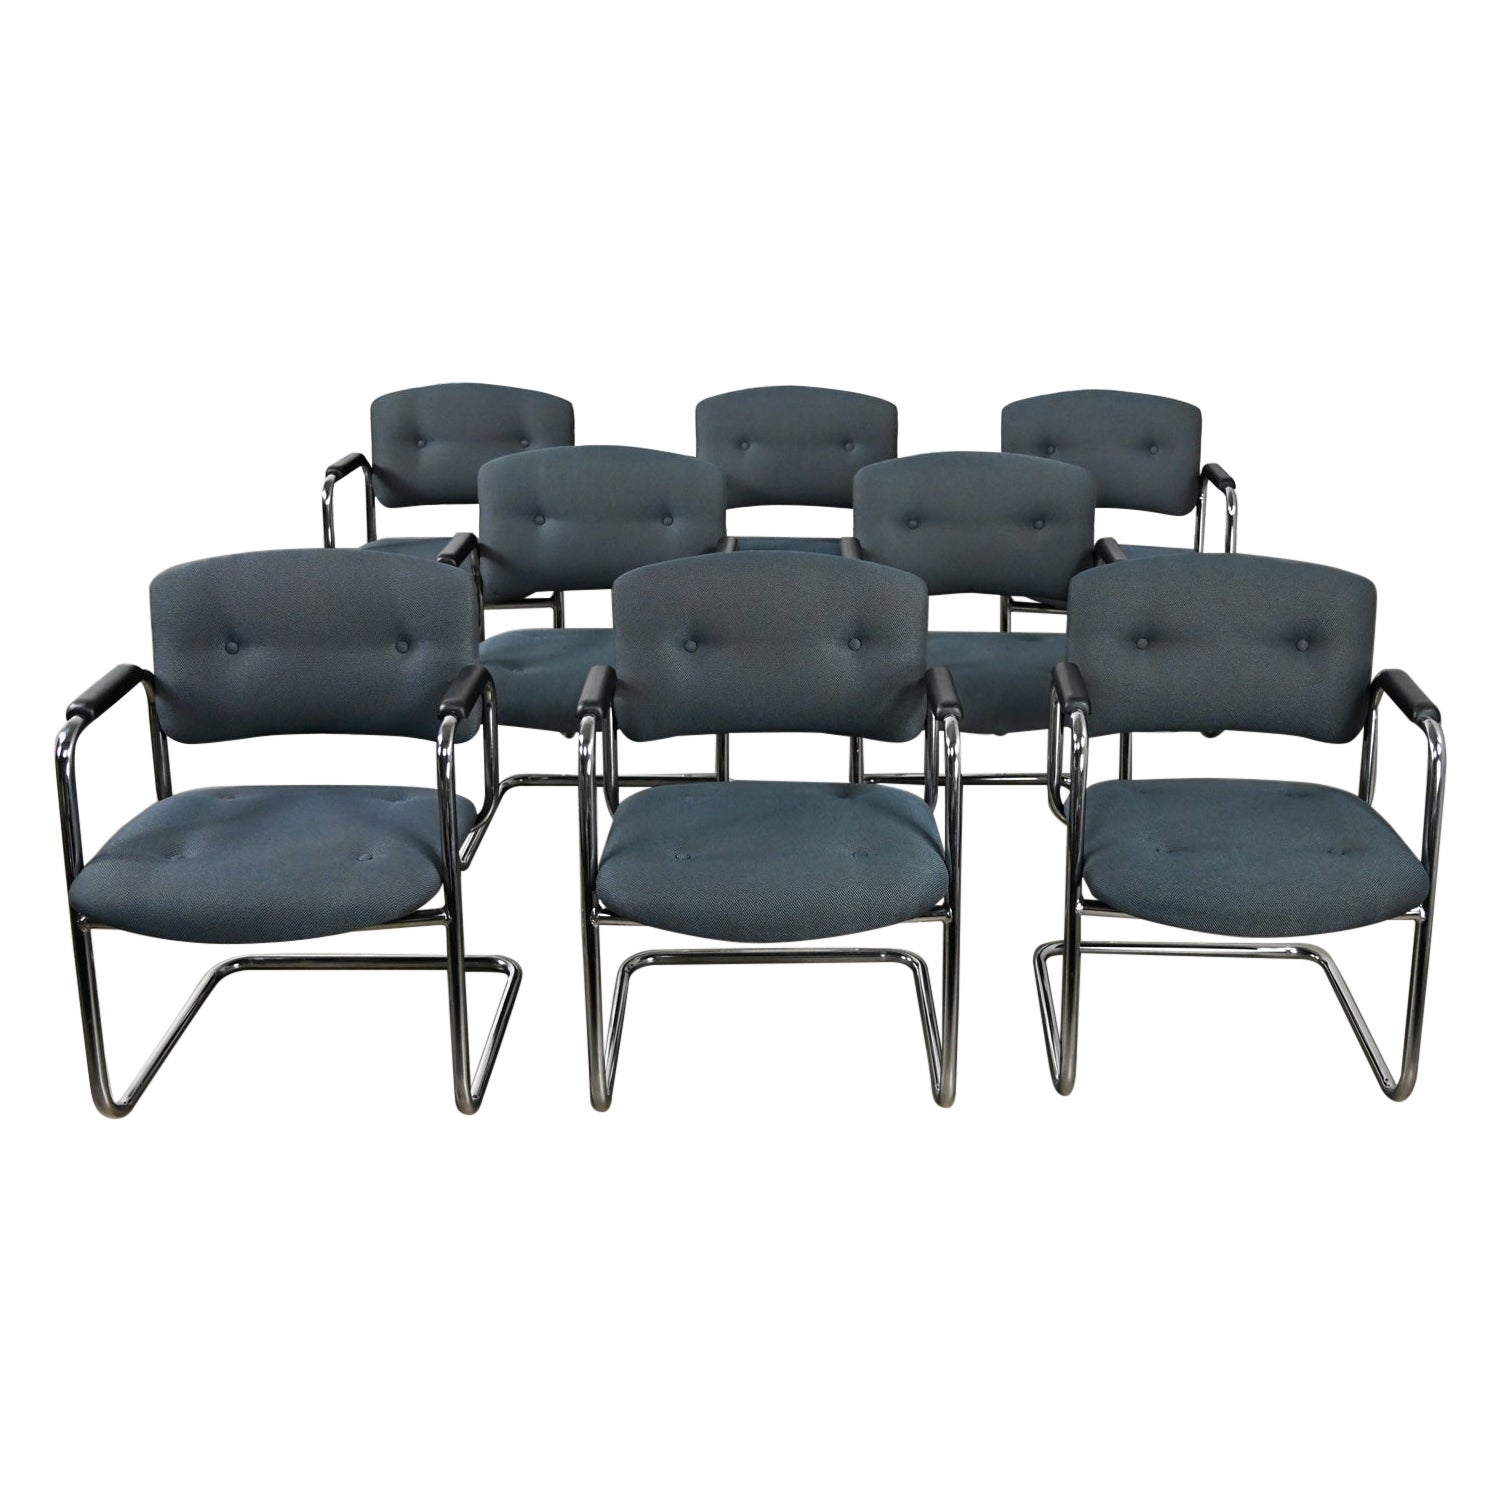 Late 20th Century Gray & Chrome Cantilever Chairs Style Steelcase Set of 8 For Sale